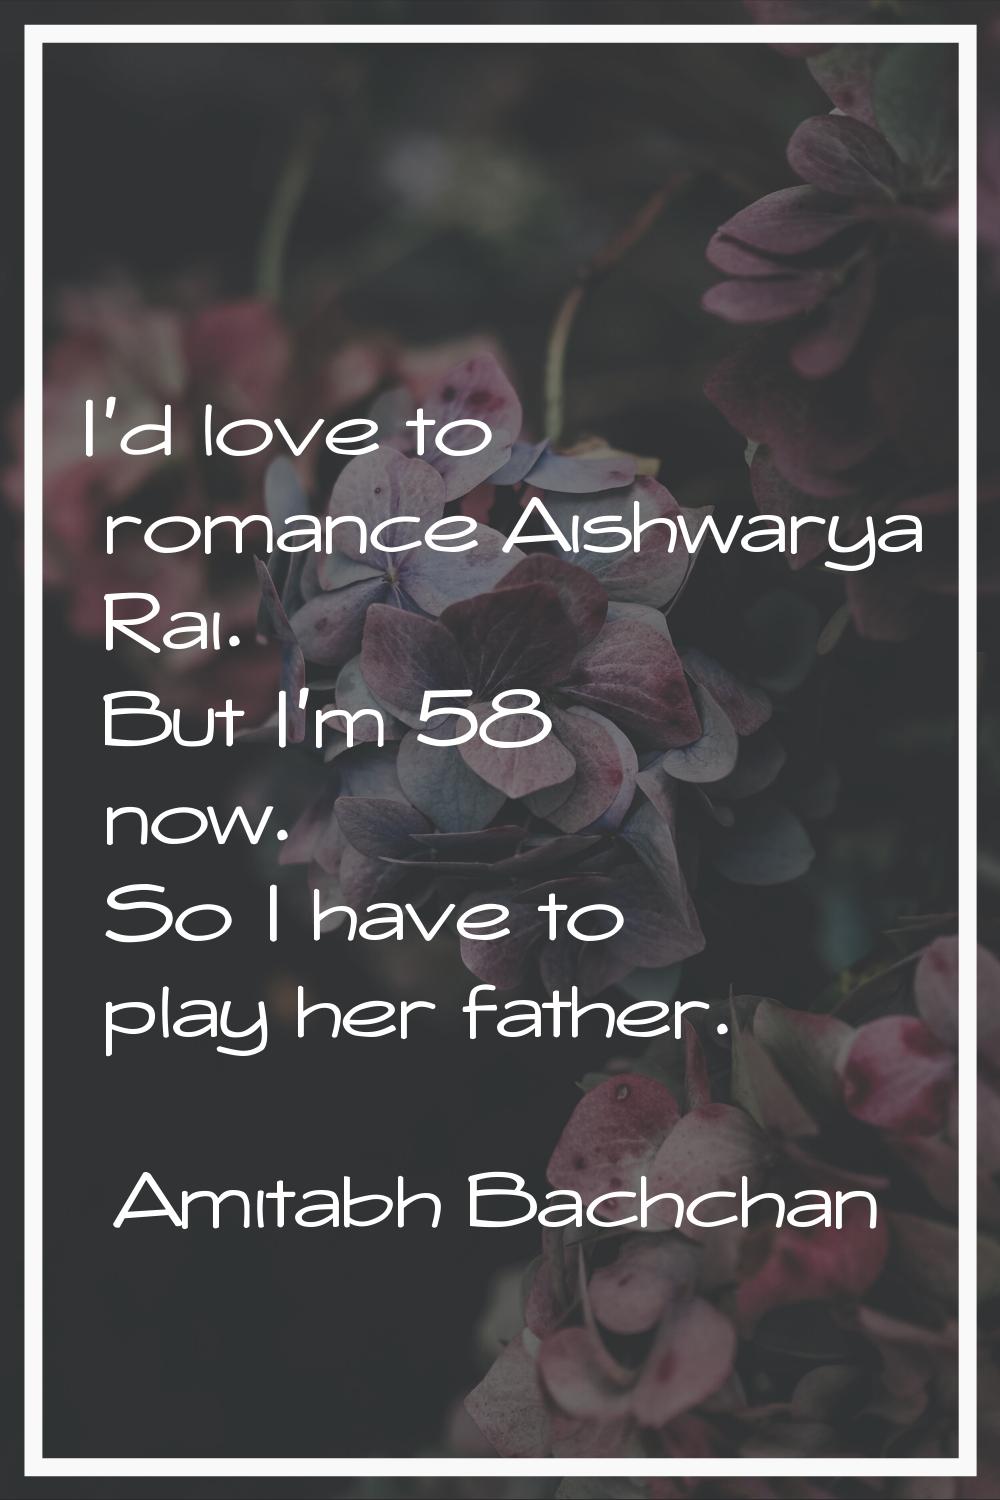 I'd love to romance Aishwarya Rai. But I'm 58 now. So I have to play her father.